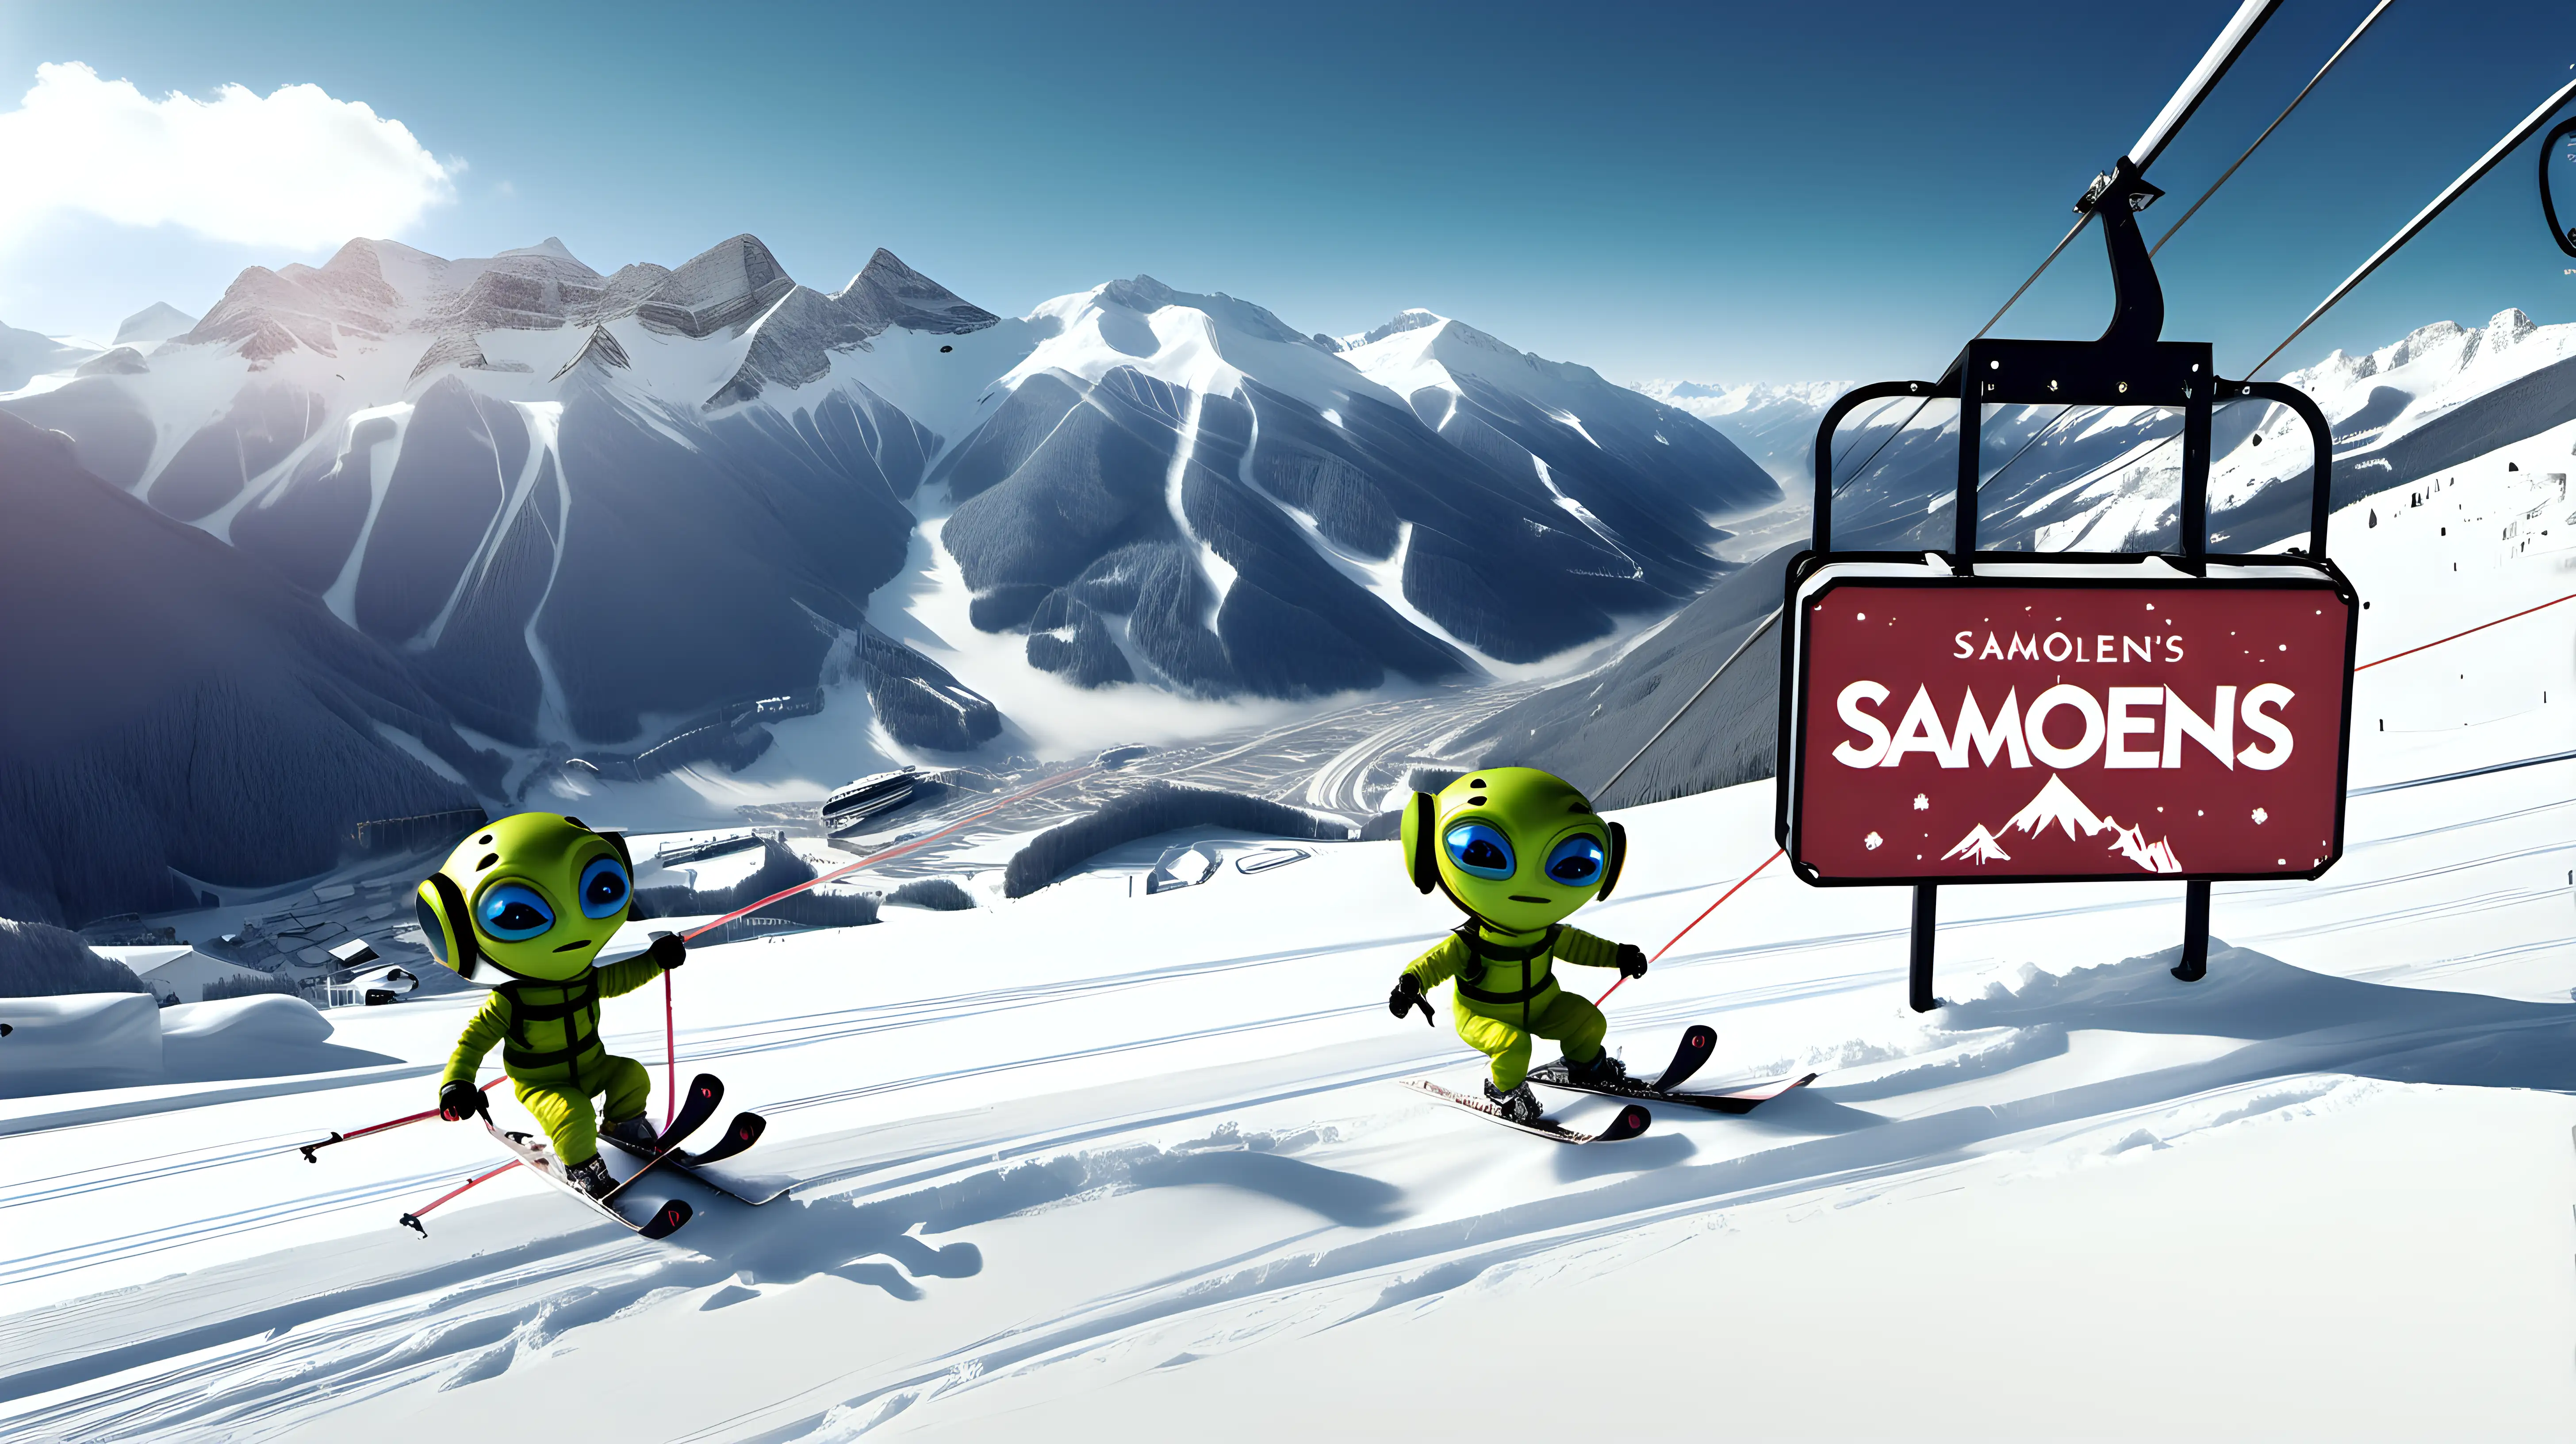 Adorable Extraterrestrial Skiing Adventure with SAMOENS Sign and Cable Car